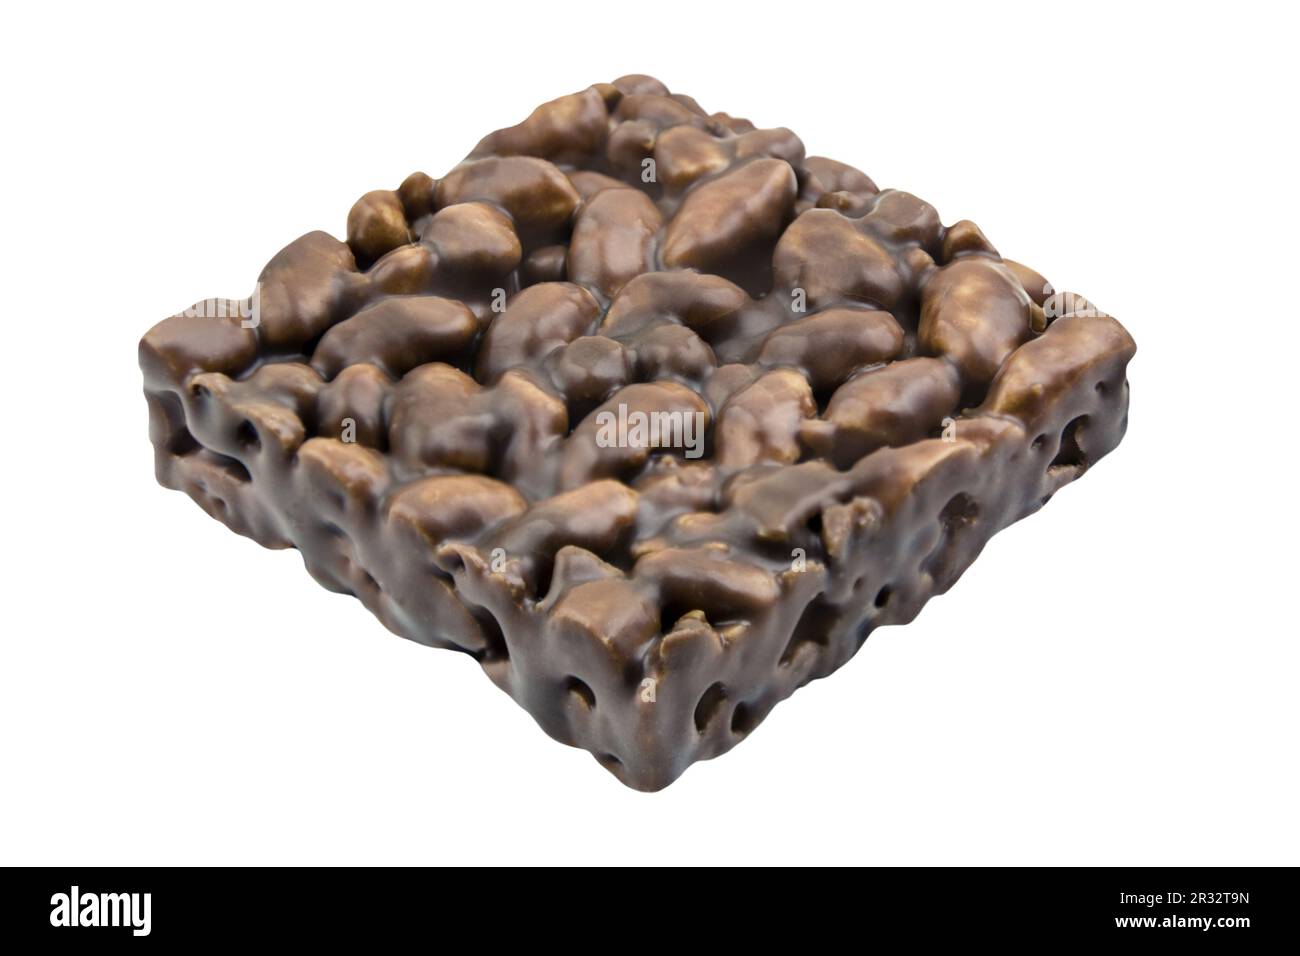 Puffed rice with chocolate coating isolated on white background Stock Photo